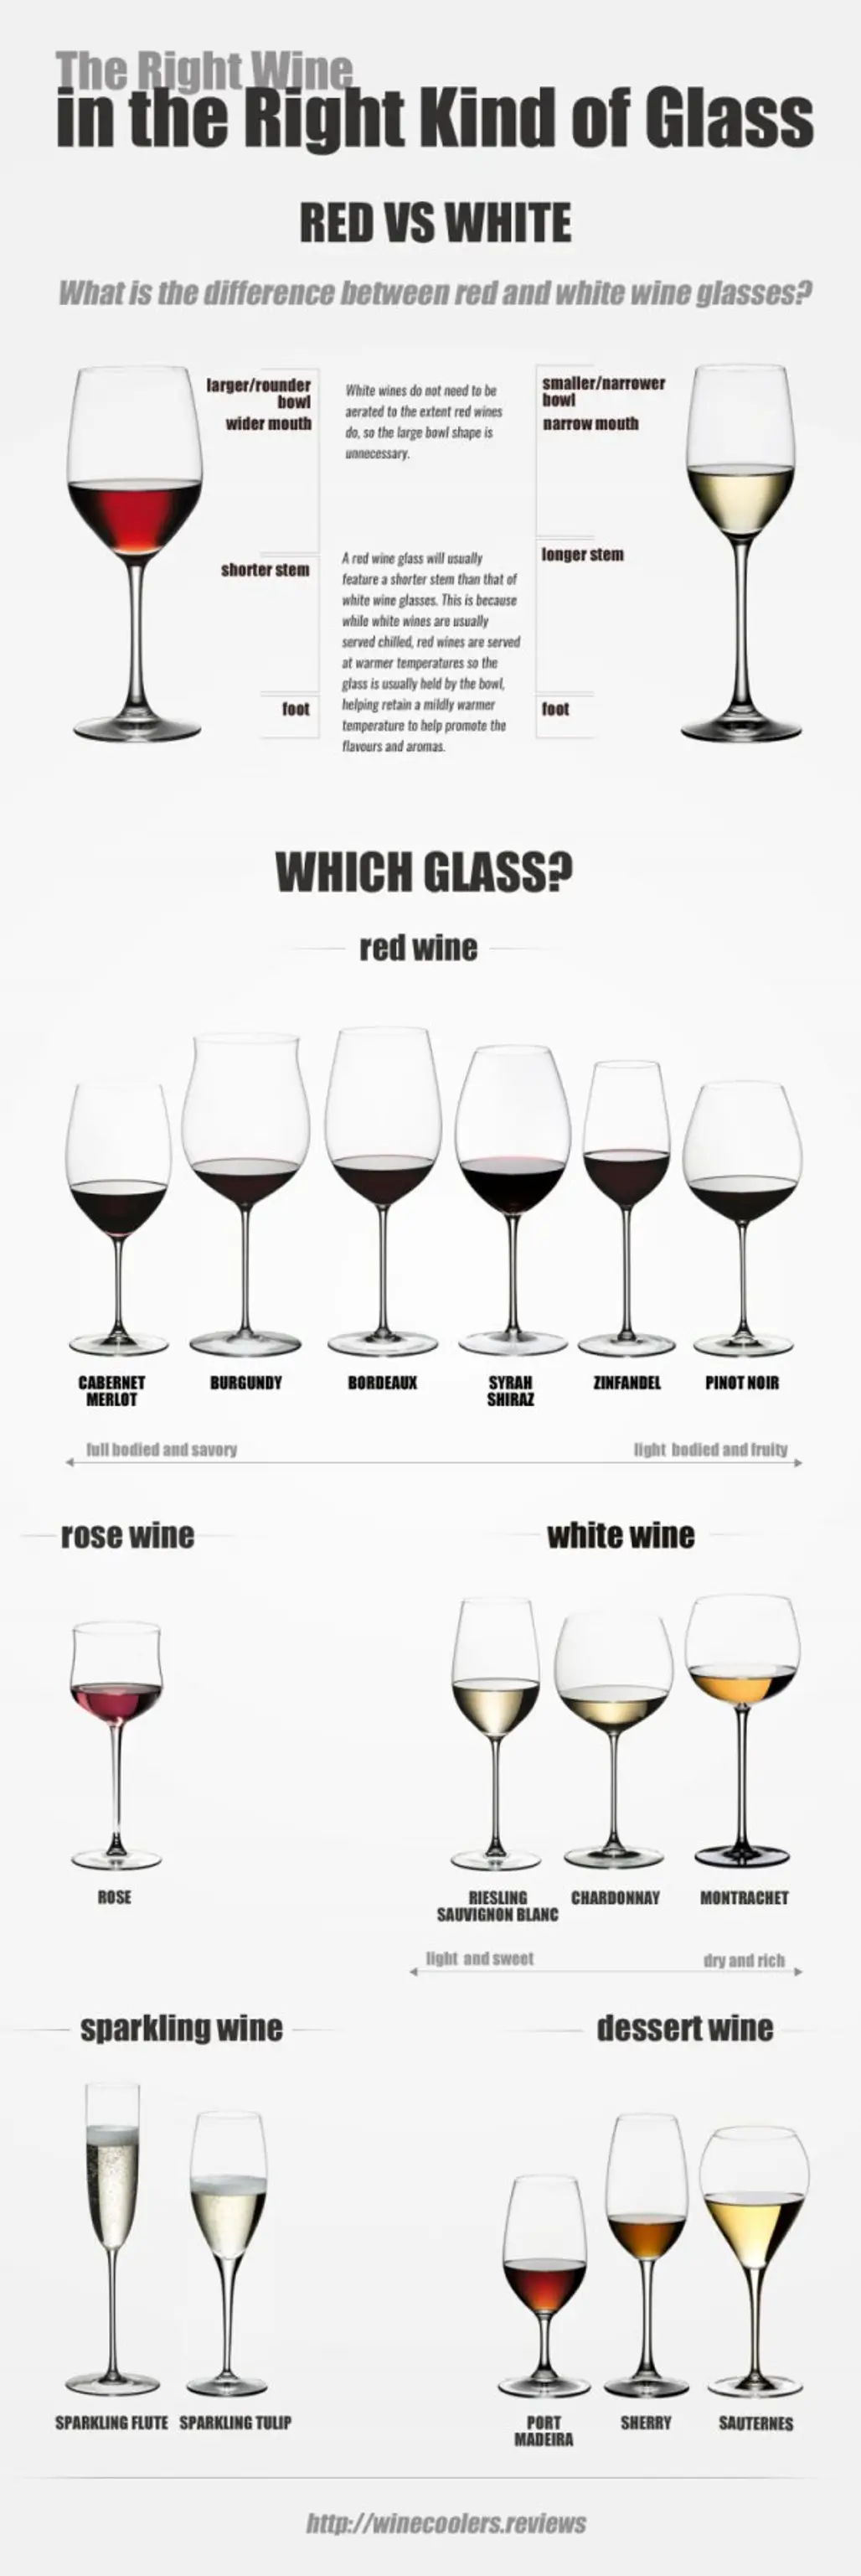 Which Glass?